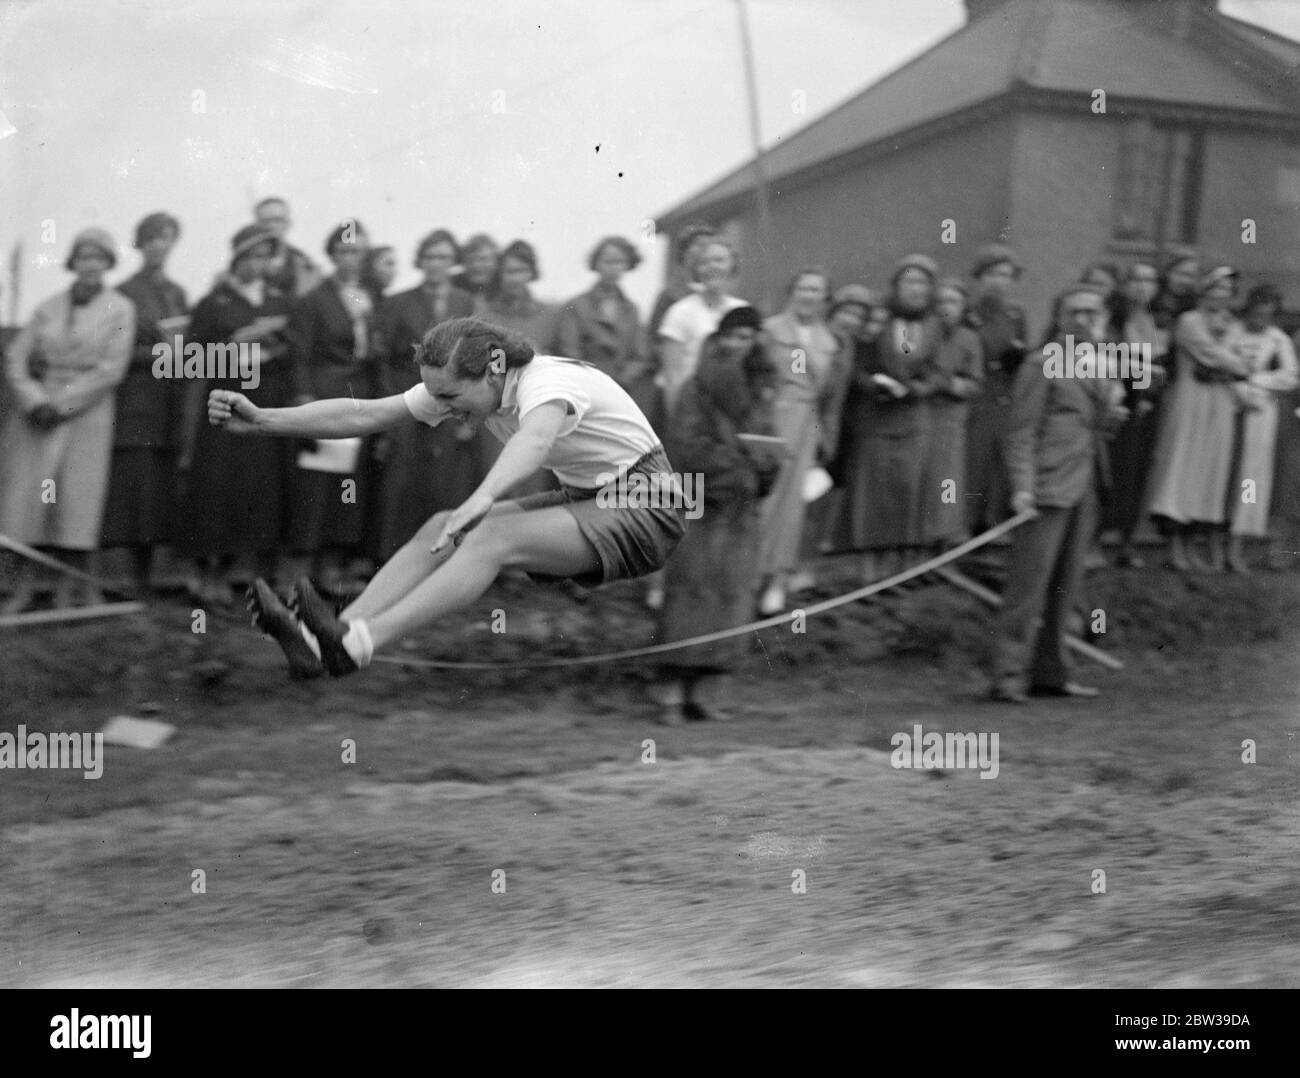 Girl long jump athlete Black and White Stock Photos & Images - Alamy